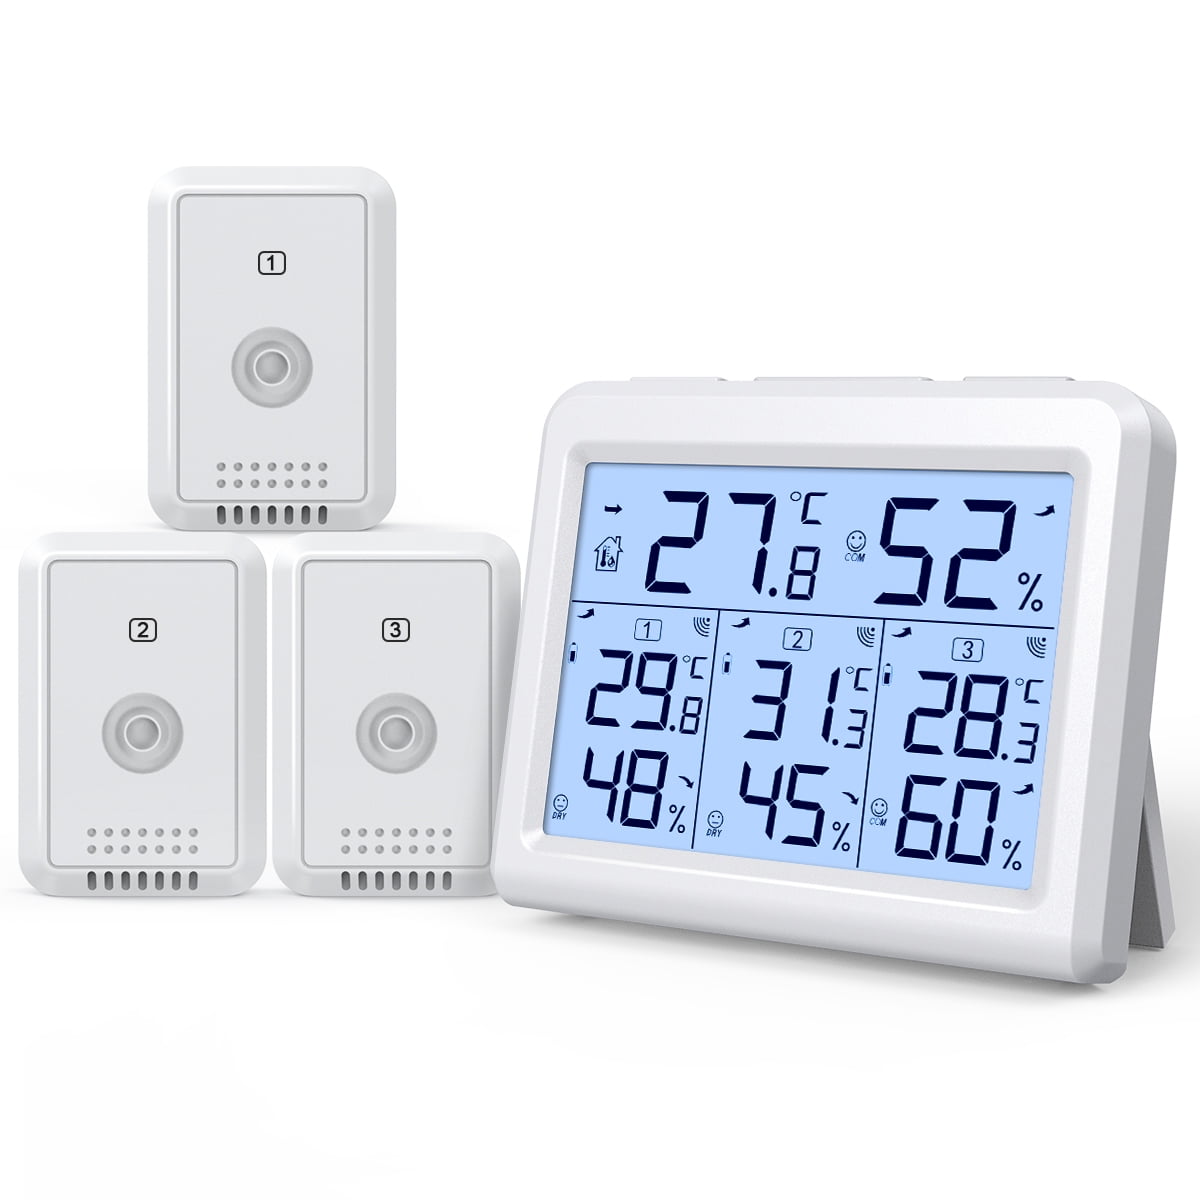 Office Room Thermometer Hygrometer for Home Temperature Humidity Monitor with 3 Wireless Sensors AMIR 【New】 Indoor Outdoor Thermometer Humidity Gauge with LCD Backlight Baby Room 